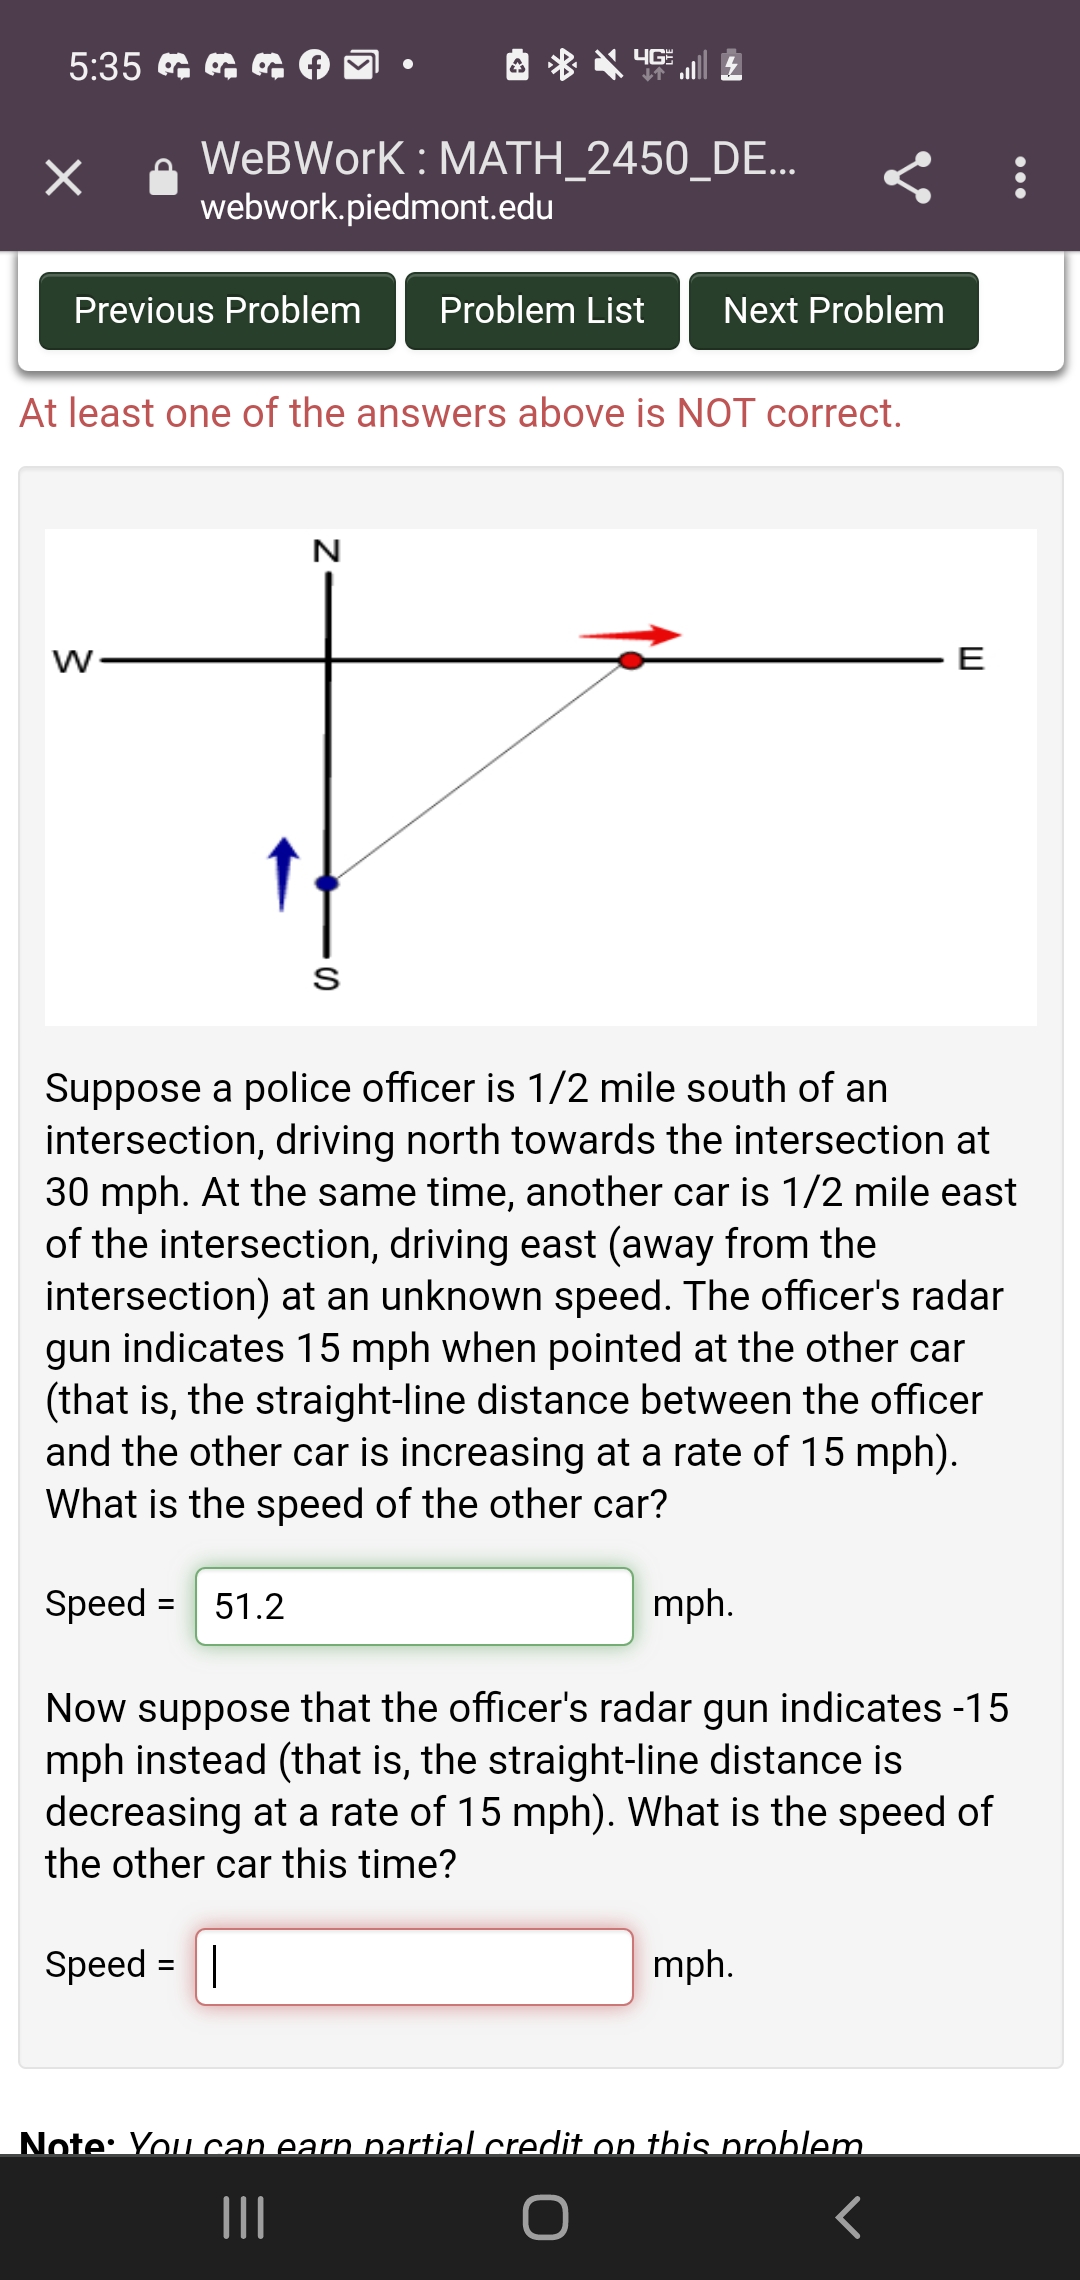 5:35 G
WeBWork : MATH_2450_DE...
webwork.piedmont.edu
Previous Problem
Problem List
Next Problem
At least one of the answers above is NOT correct.
N
E
Suppose a police officer is 1/2 mile south of an
intersection, driving north towards the intersection at
30 mph. At the same time, another car is 1/2 mile east
of the intersection, driving east (away from the
intersection) at an unknown speed. The officer's radar
gun indicates 15 mph when pointed at the other car
(that is, the straight-line distance between the officer
and the other car is increasing at a rate of 15 mph).
What is the speed of the other car?
Speed = 51.2
mph.
Now suppose that the officer's radar gun indicates -15
mph instead (that is, the straight-line distance is
decreasing at a rate of 15 mph). What is the speed of
the other car this time?
Speed = ||
mph.
Note: You can earn partial credit on this problem
II
